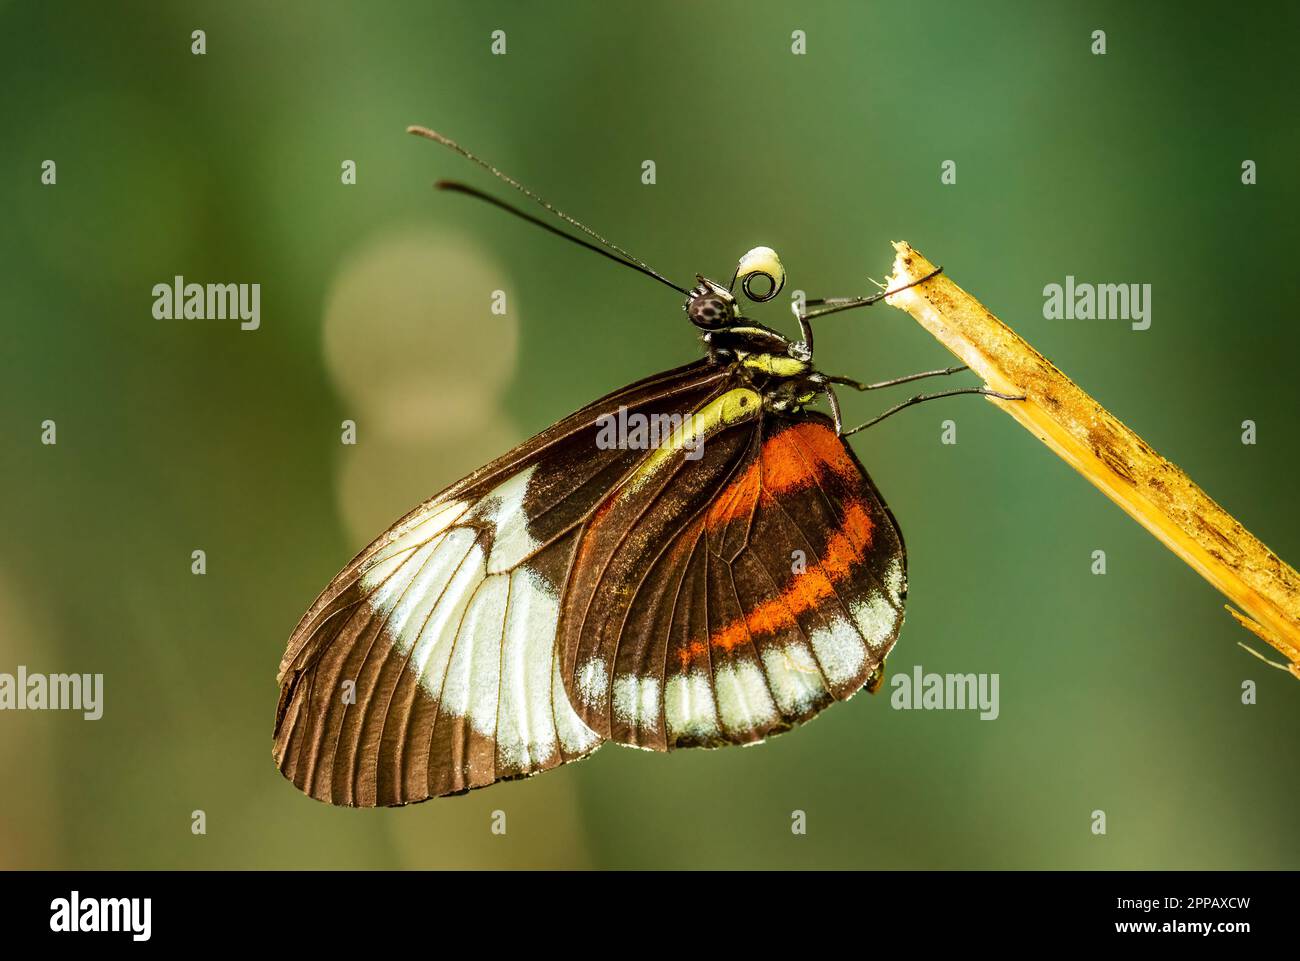 Cydno Longwing - Heliconius cydno, beautiful colored tropical butterfly from Central and Latin America woodlands, meadows and gardens, Panama. Stock Photo